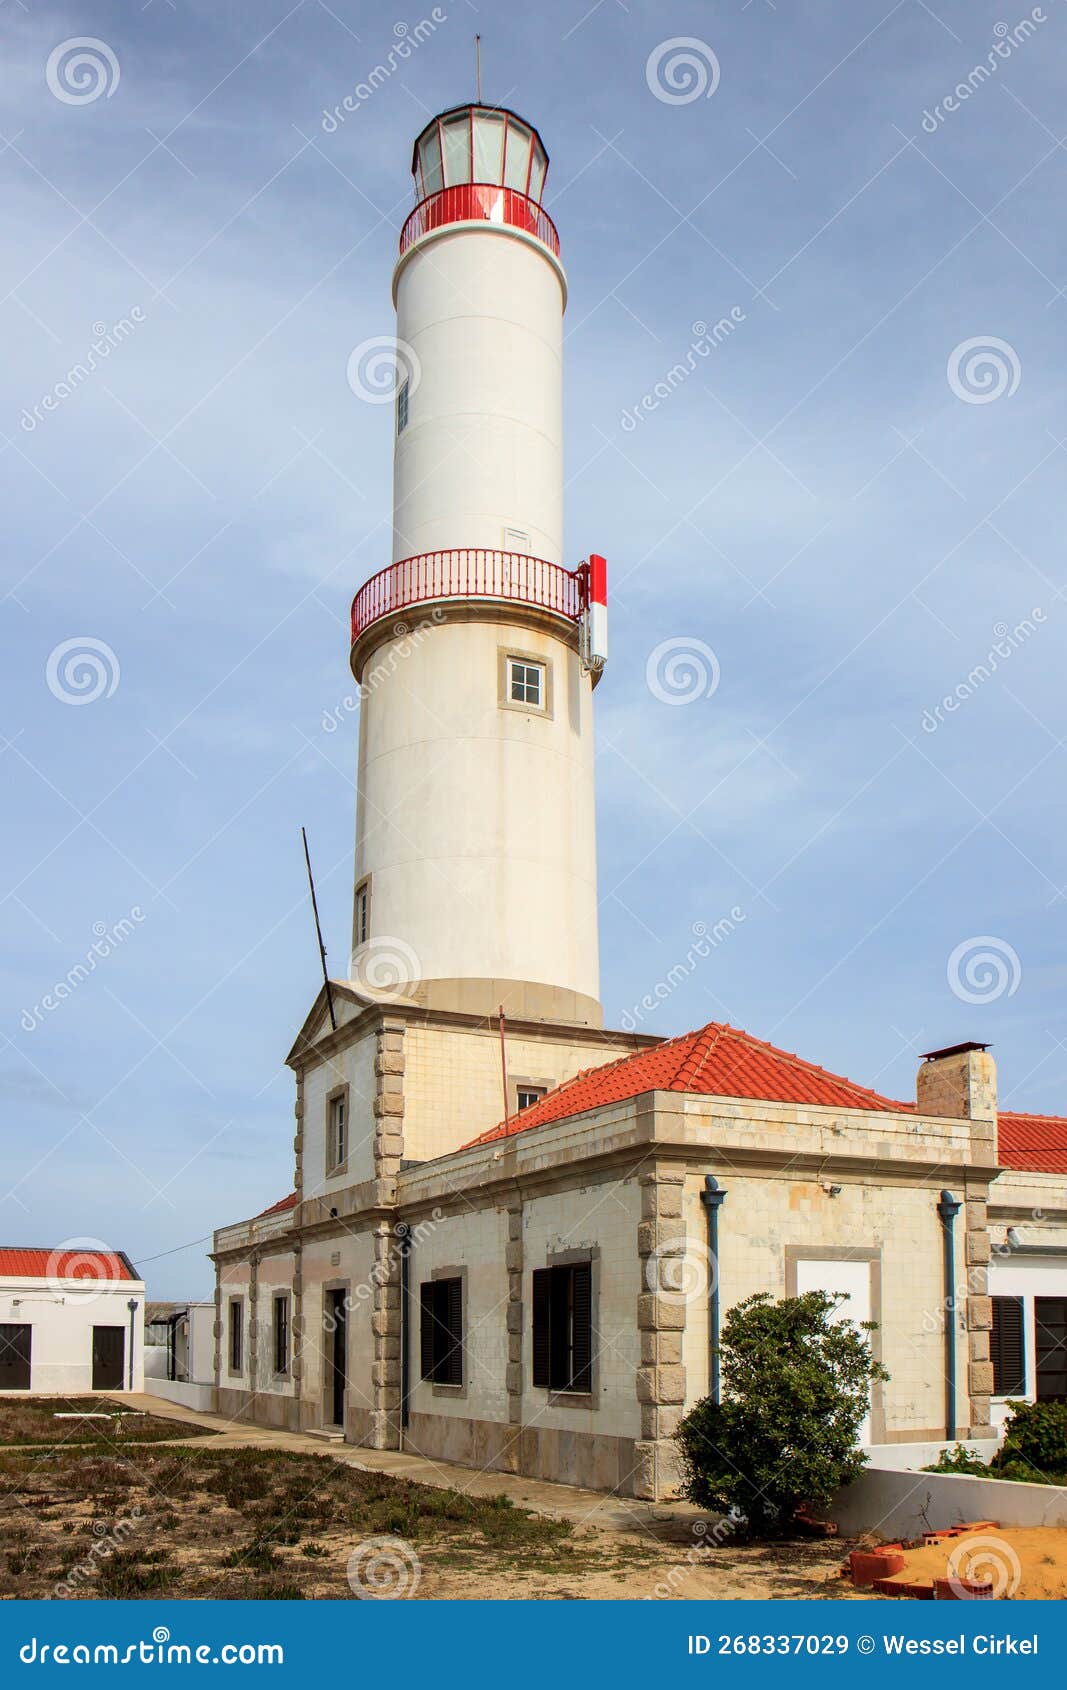 lighthouse of sines, portugal